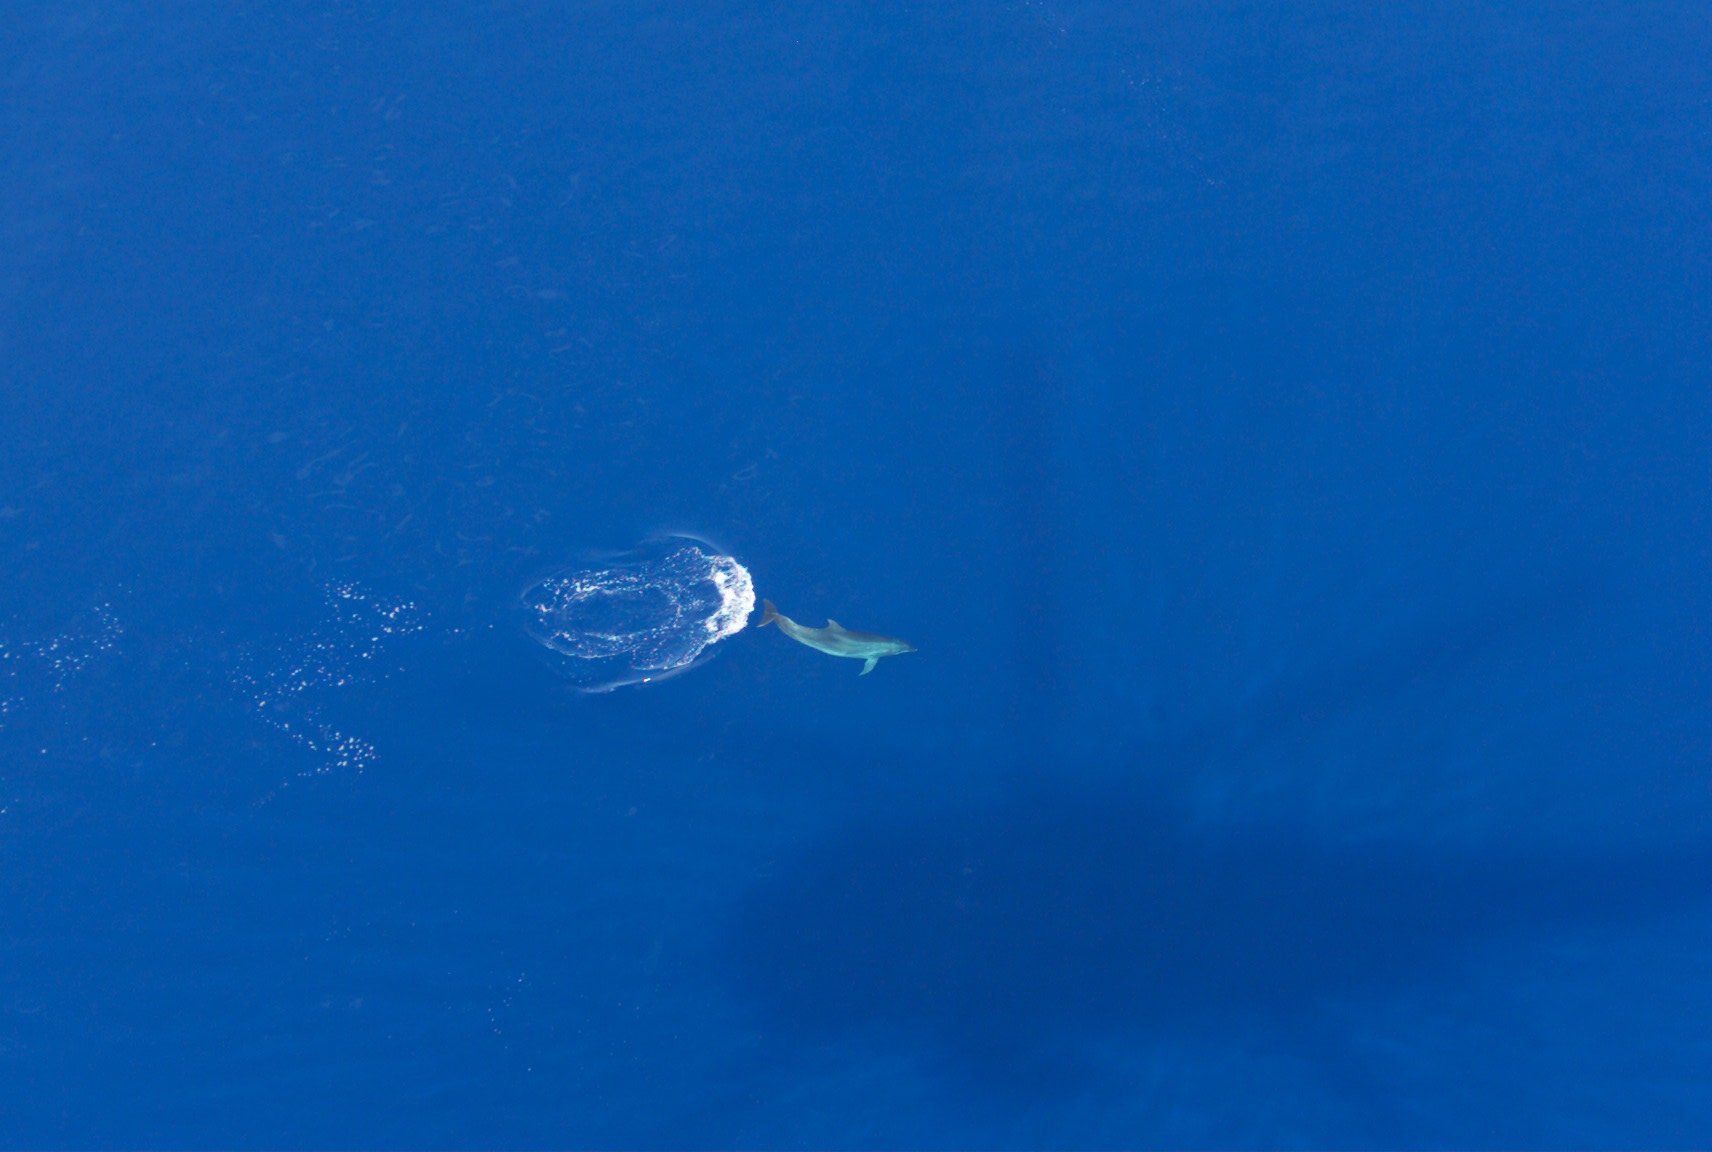 A dolphin viewed from HMCS Winnipeg's Ch-124 Sea King helicopter. See the helo's shadow